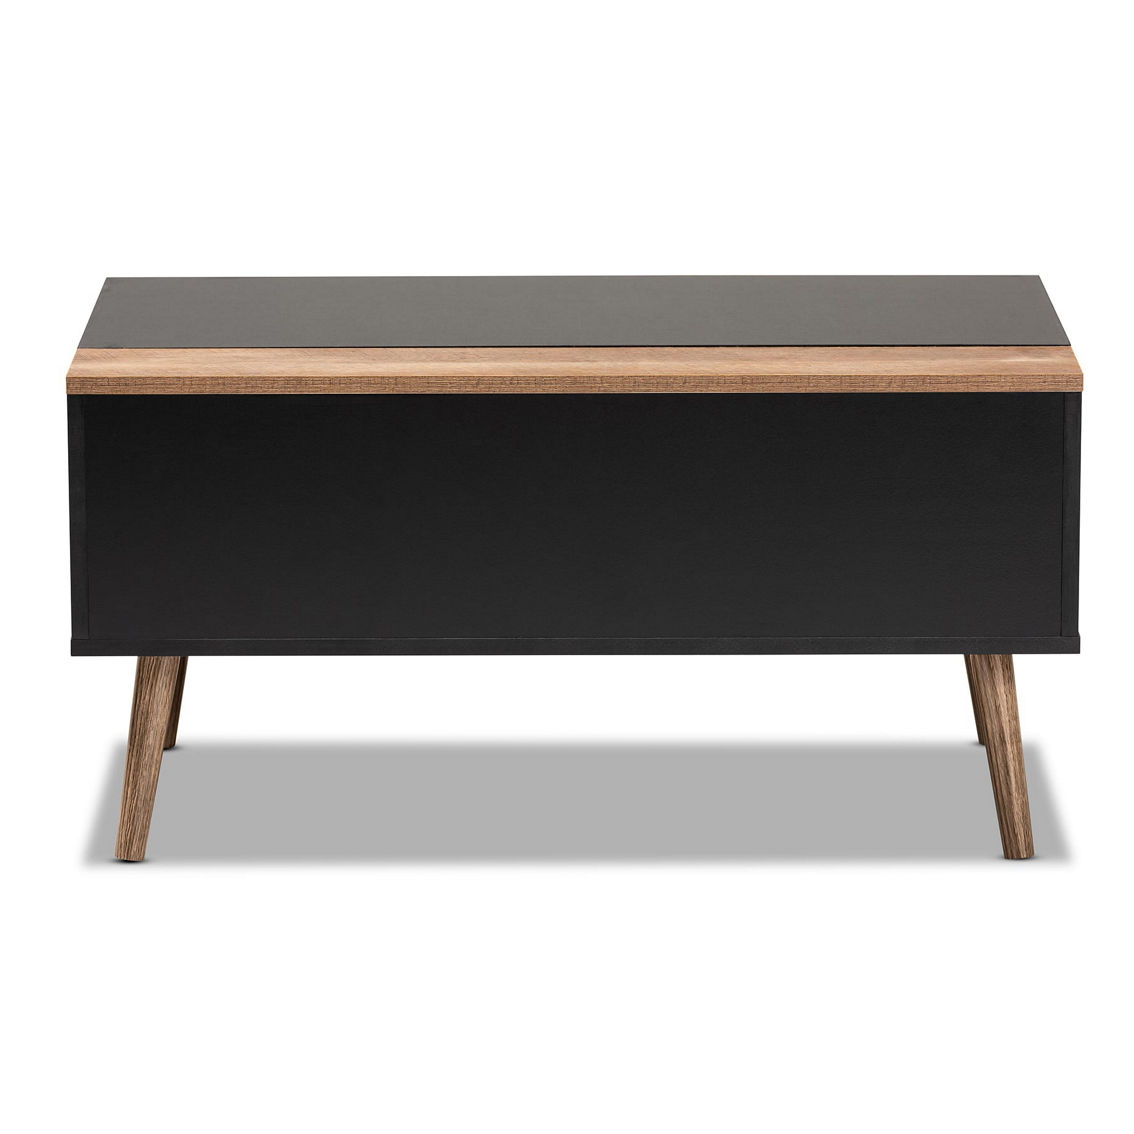 Baxton Studio Jensen Black and Brown Wood Lift Top Coffee Table with Storage - Image 5 of 5